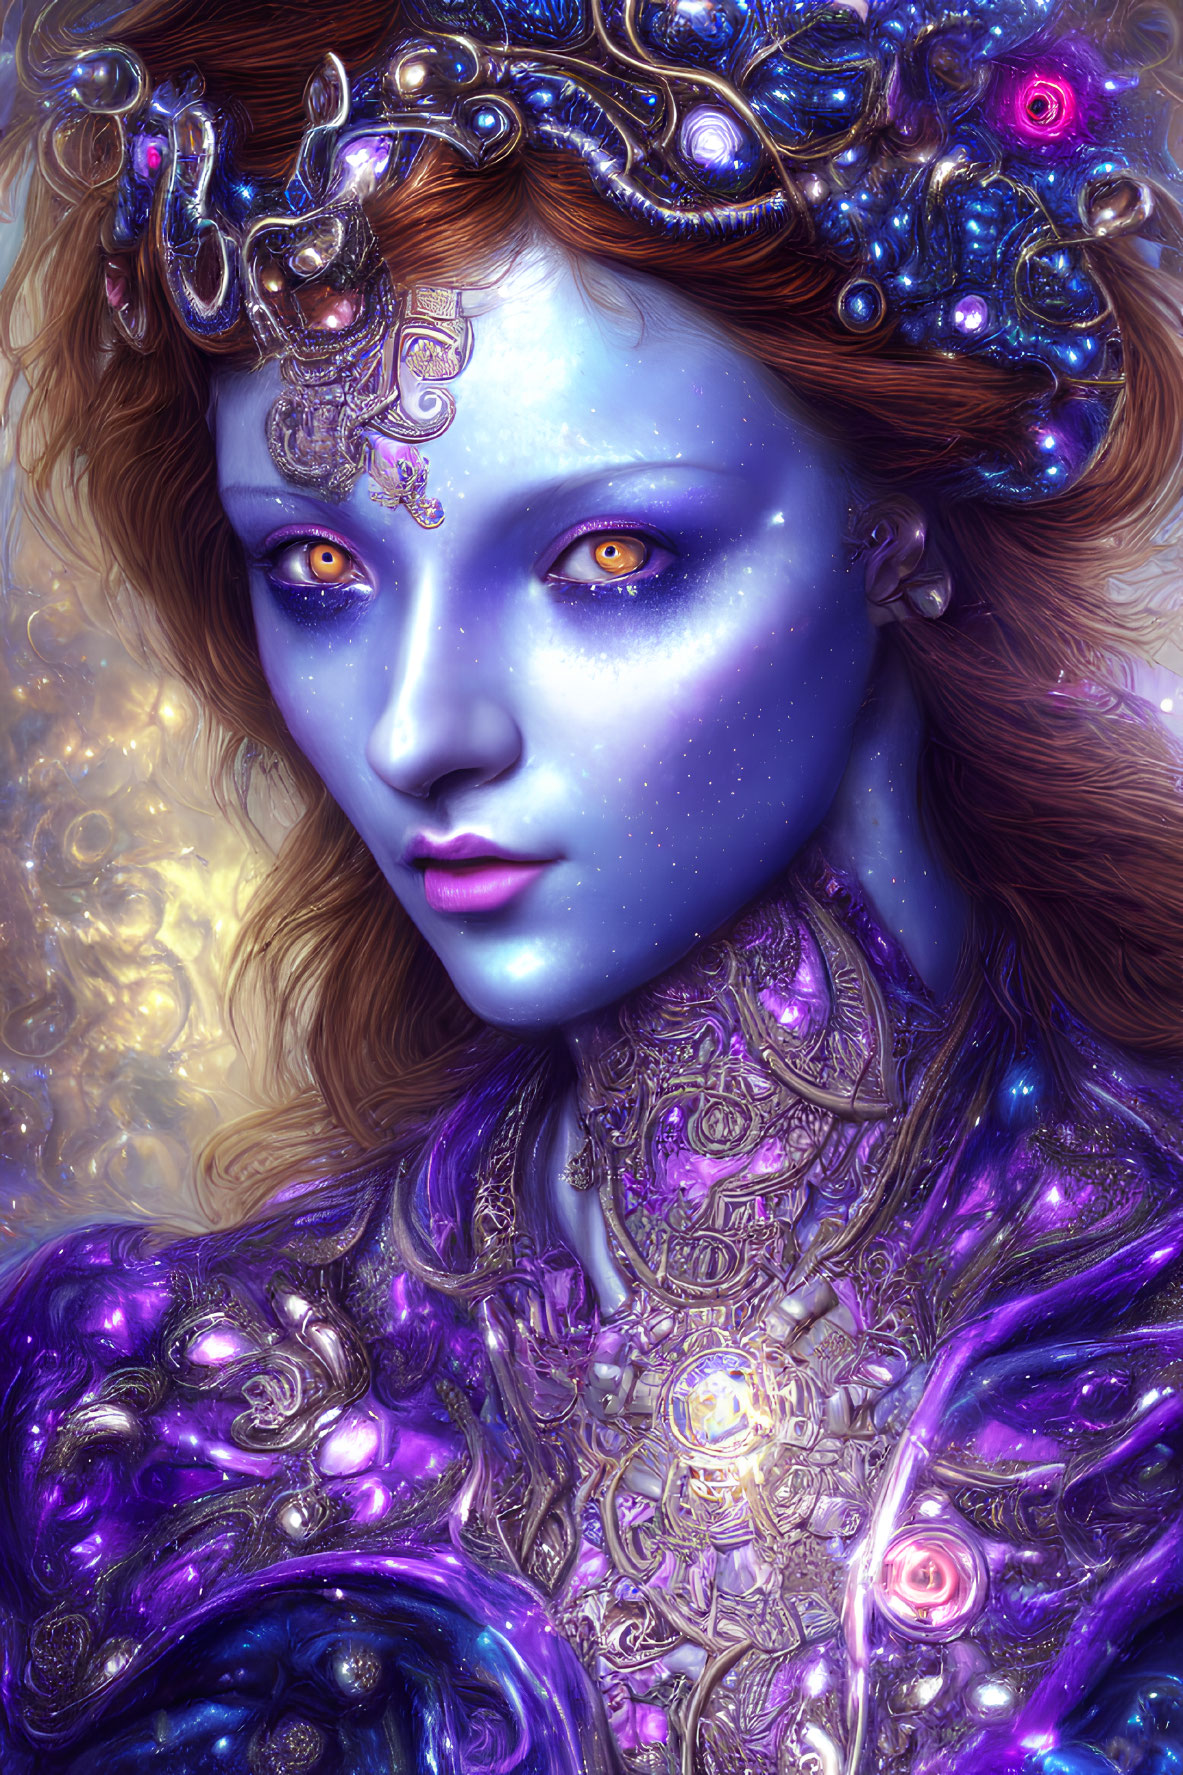 Fantasy illustration of woman with violet skin and golden eyes